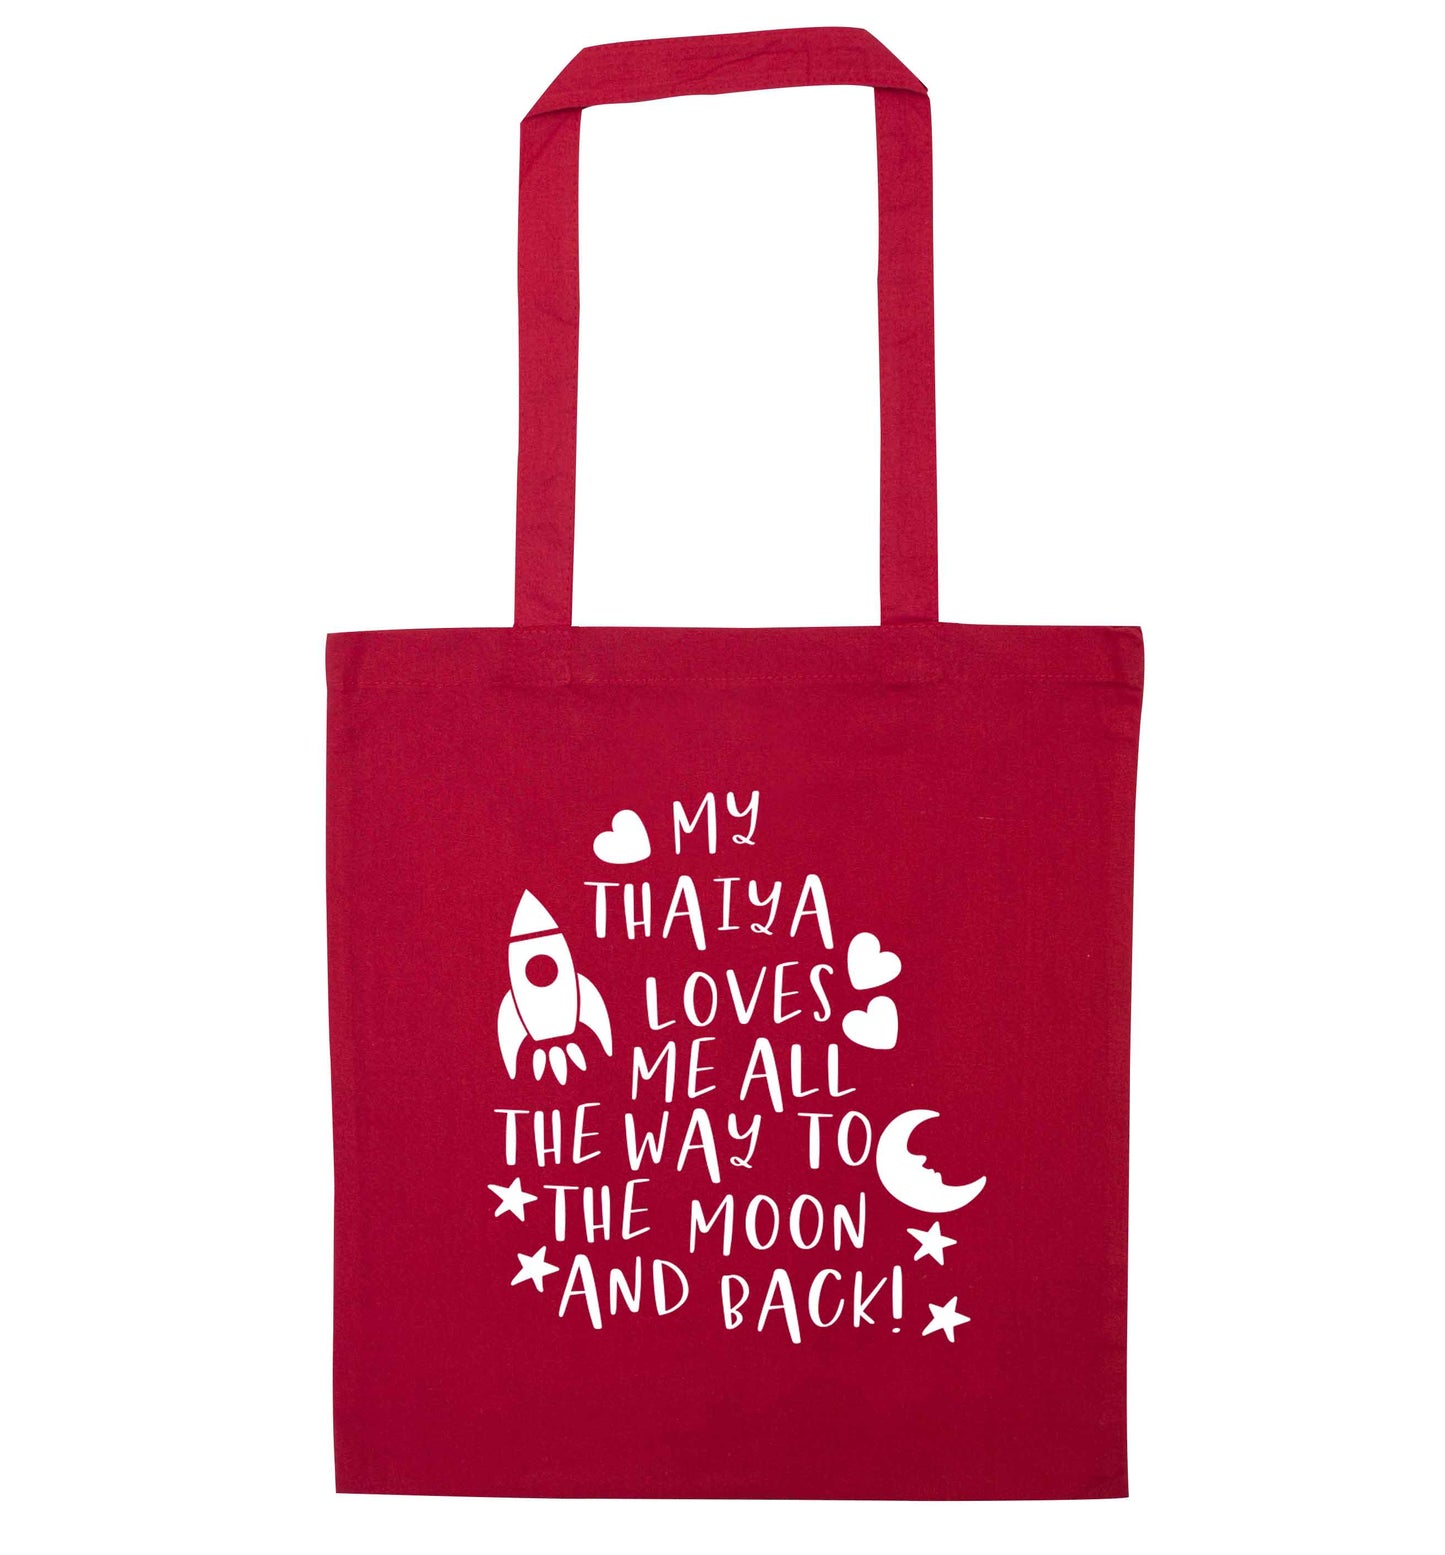 My thaiya loves me all the way to the moon and back red tote bag